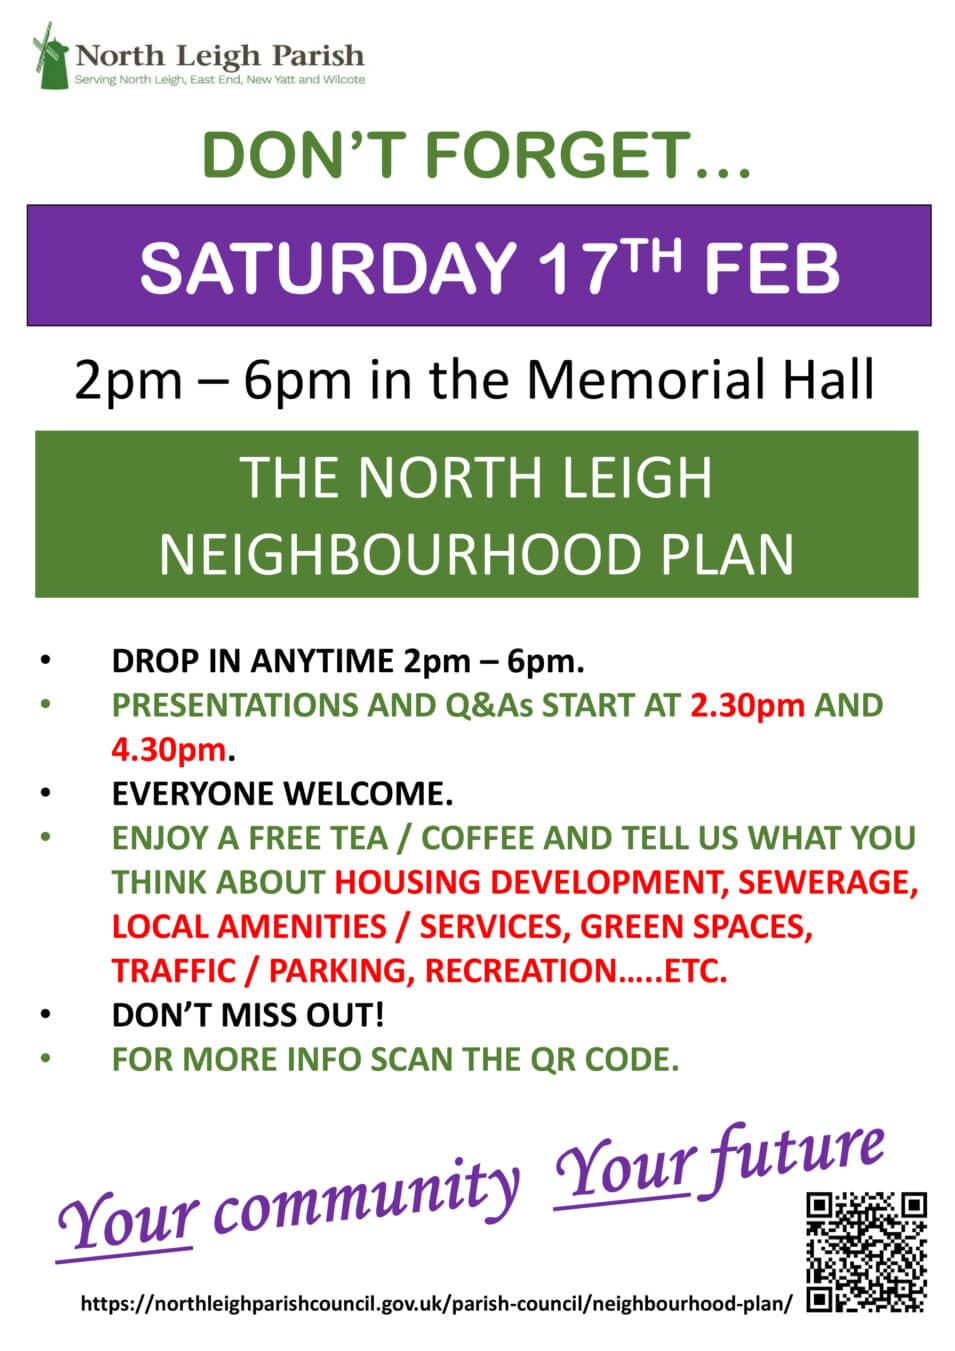 NP Flyer re meeting 17th February